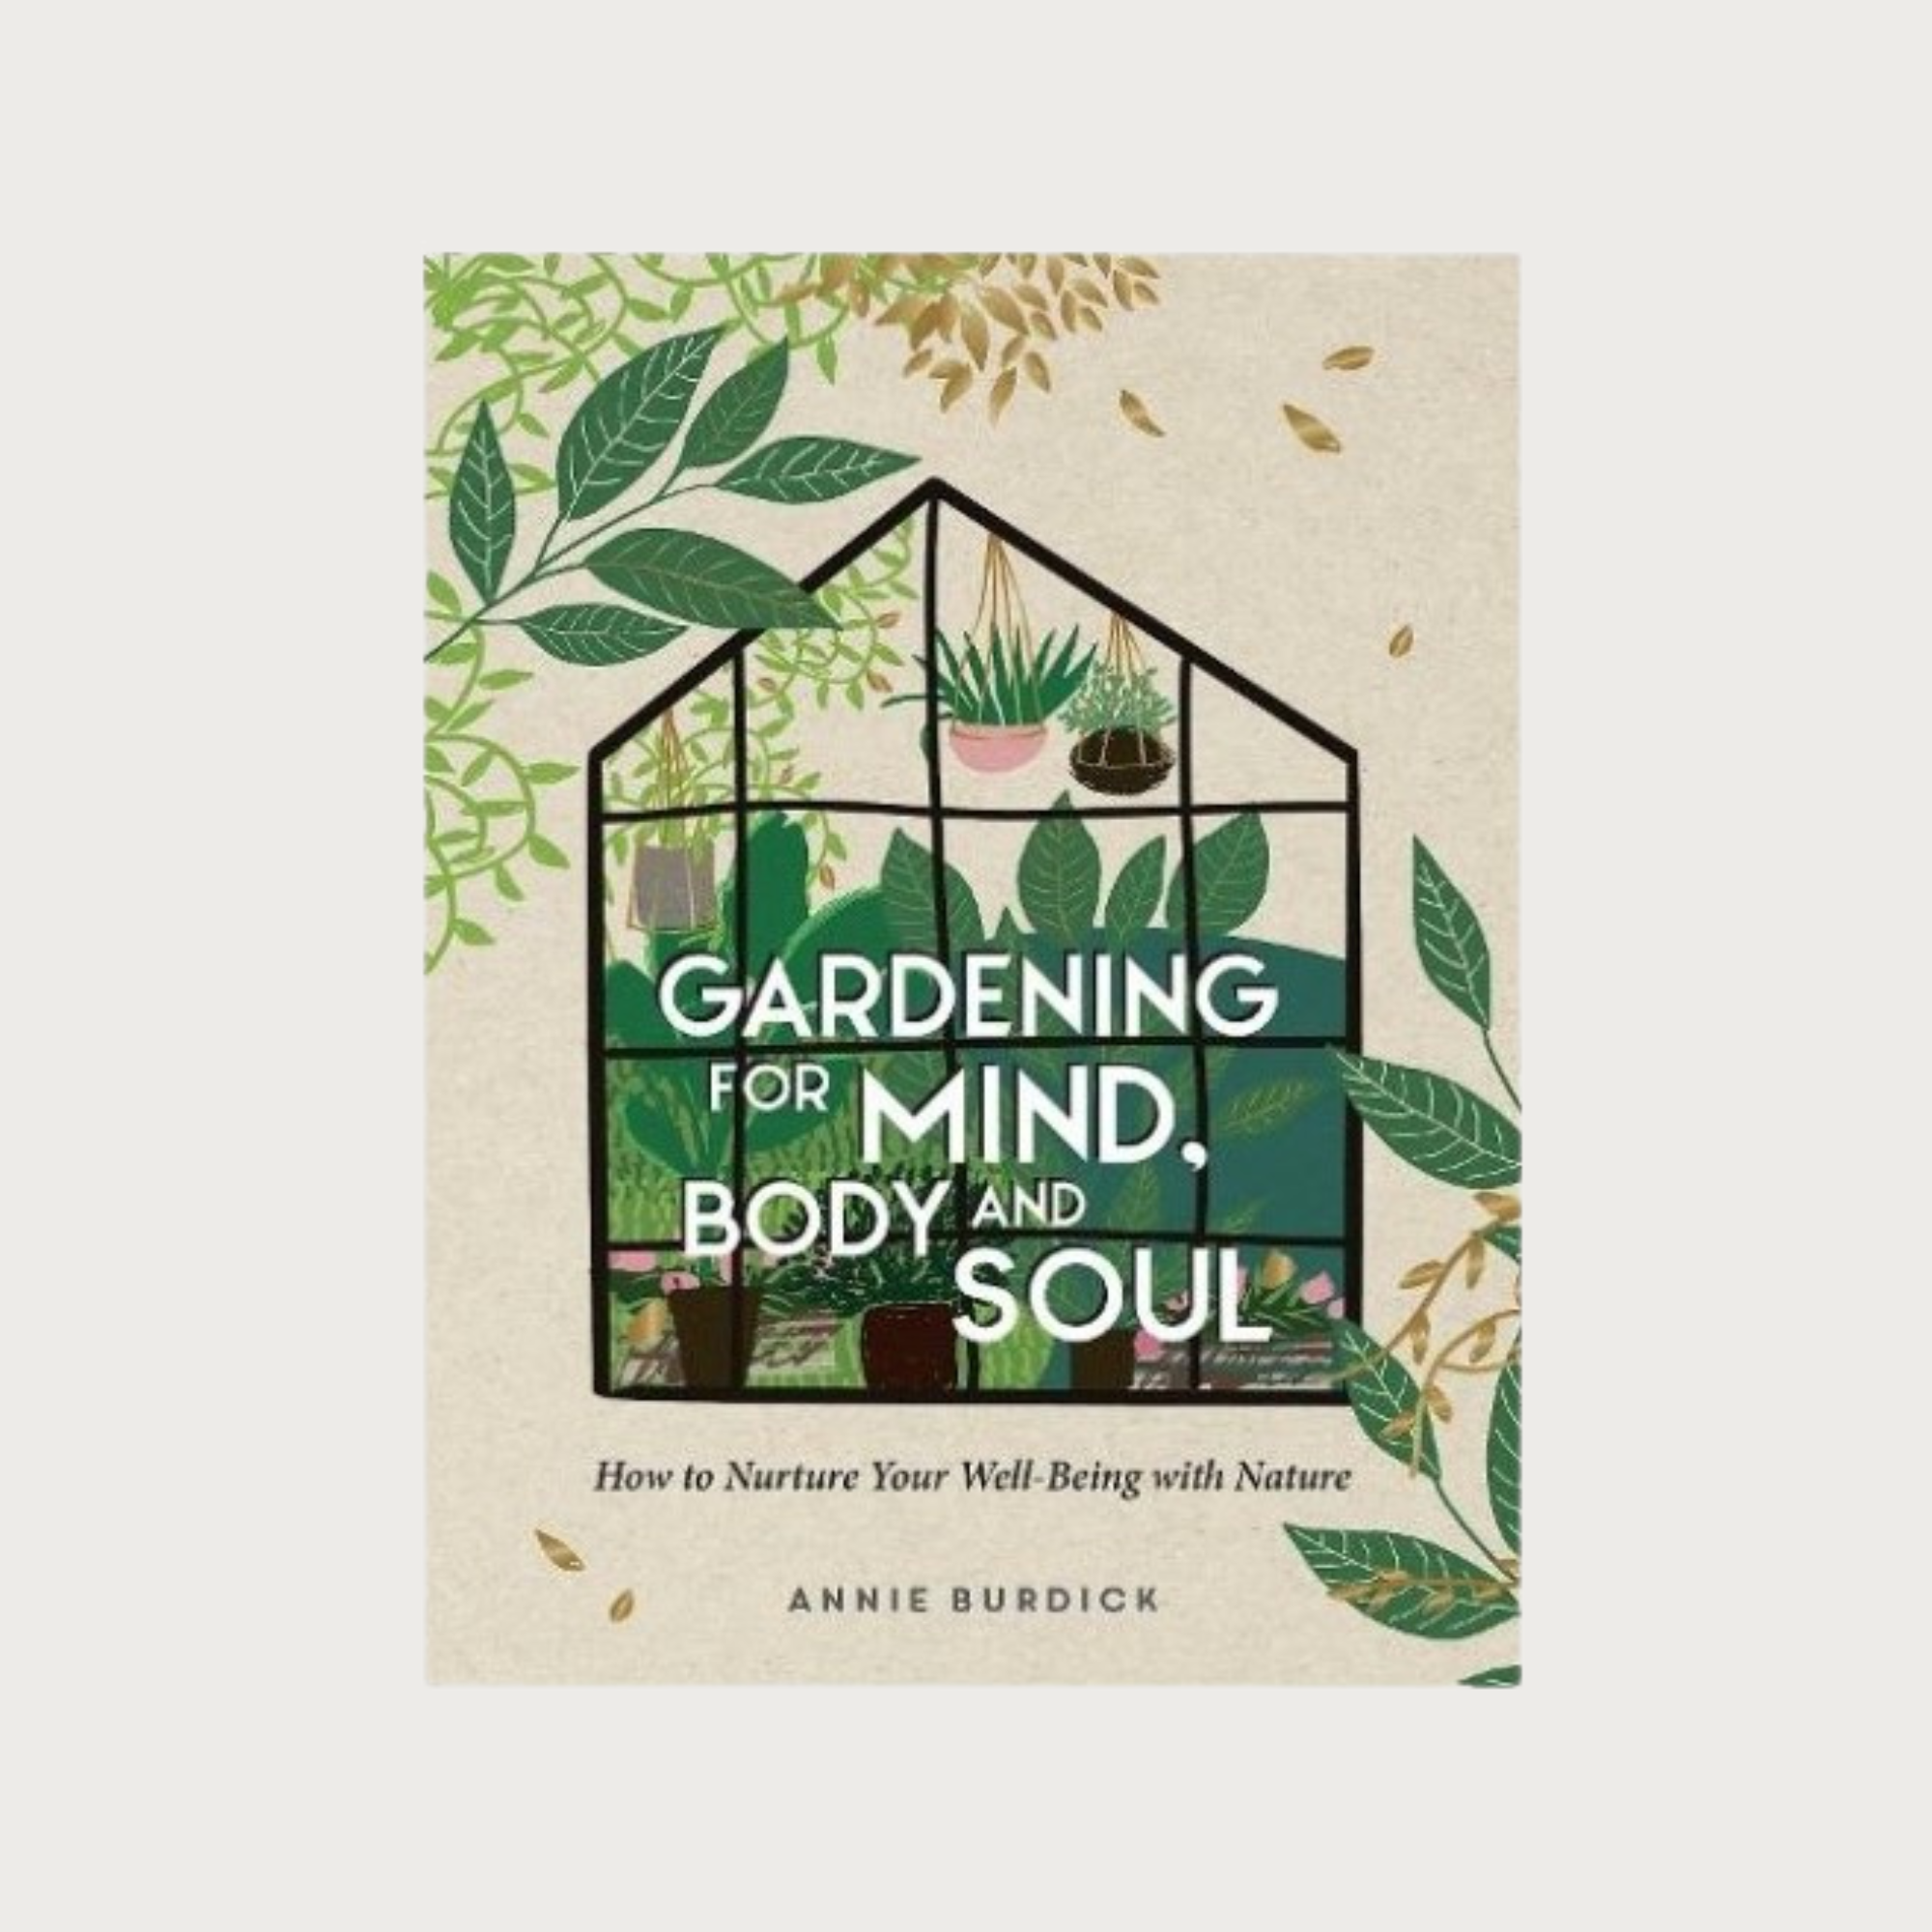 Gardening for the Mind, Body and Soul book